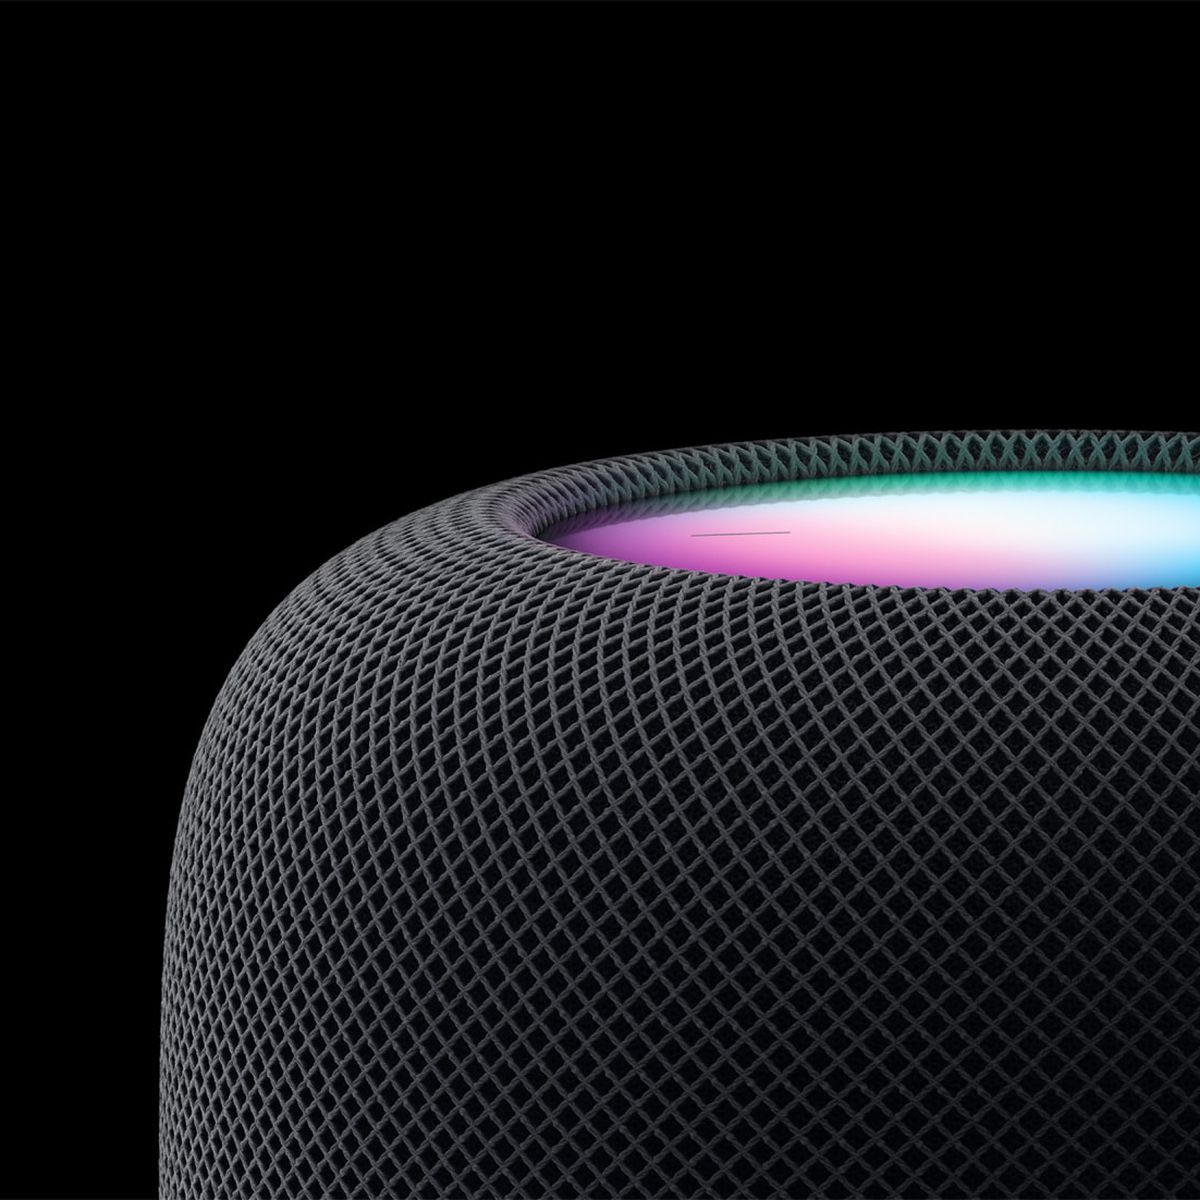 Hands-on: HomePod 2 exceeds expectations, but there's one thing